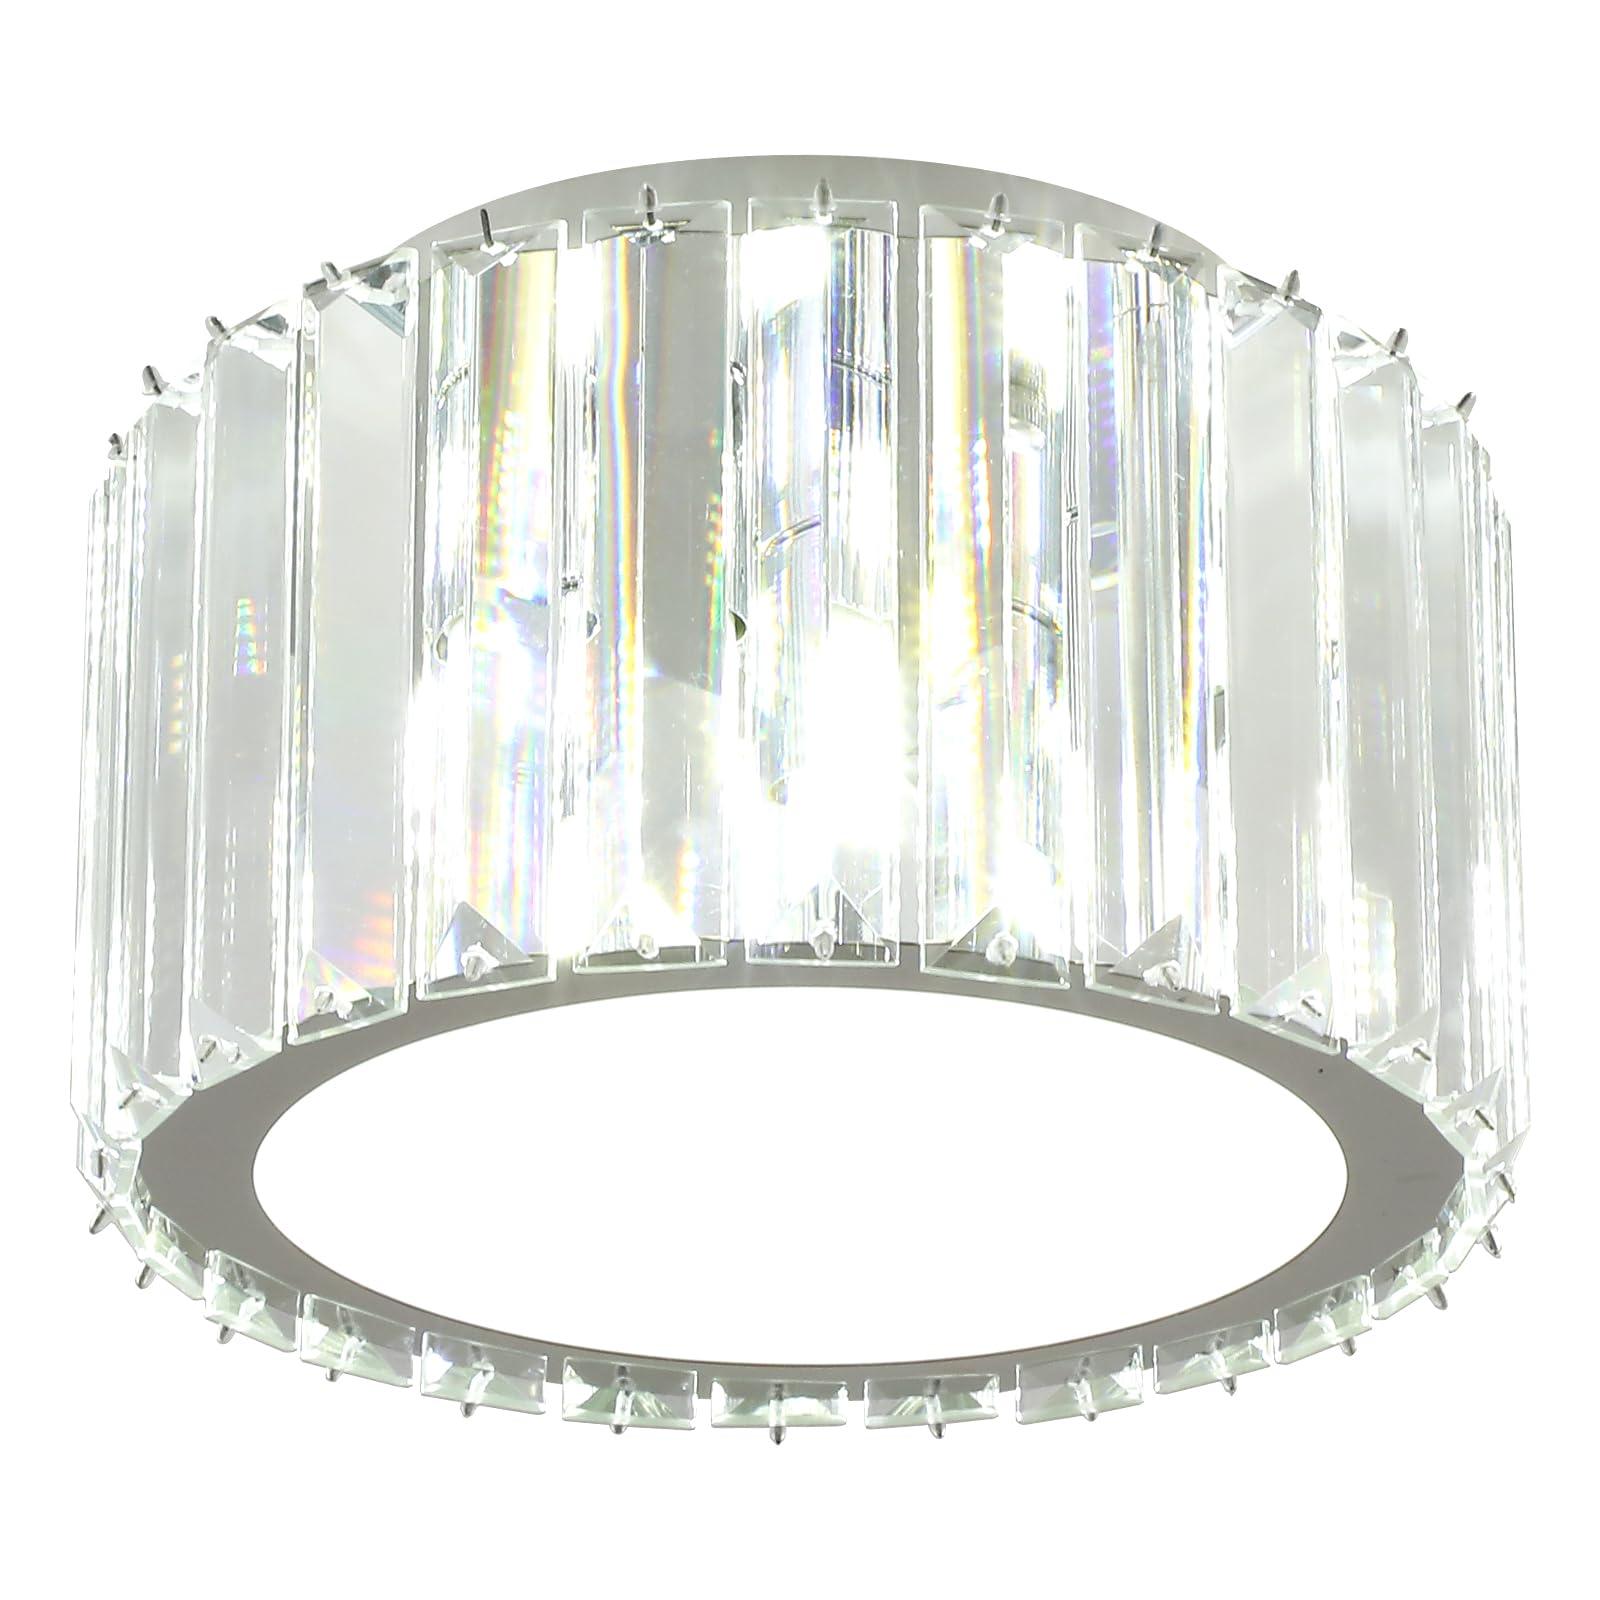 FORCOSO Crystal Light Shade Ceiling Chrome Ø22cm Round 3 Lights